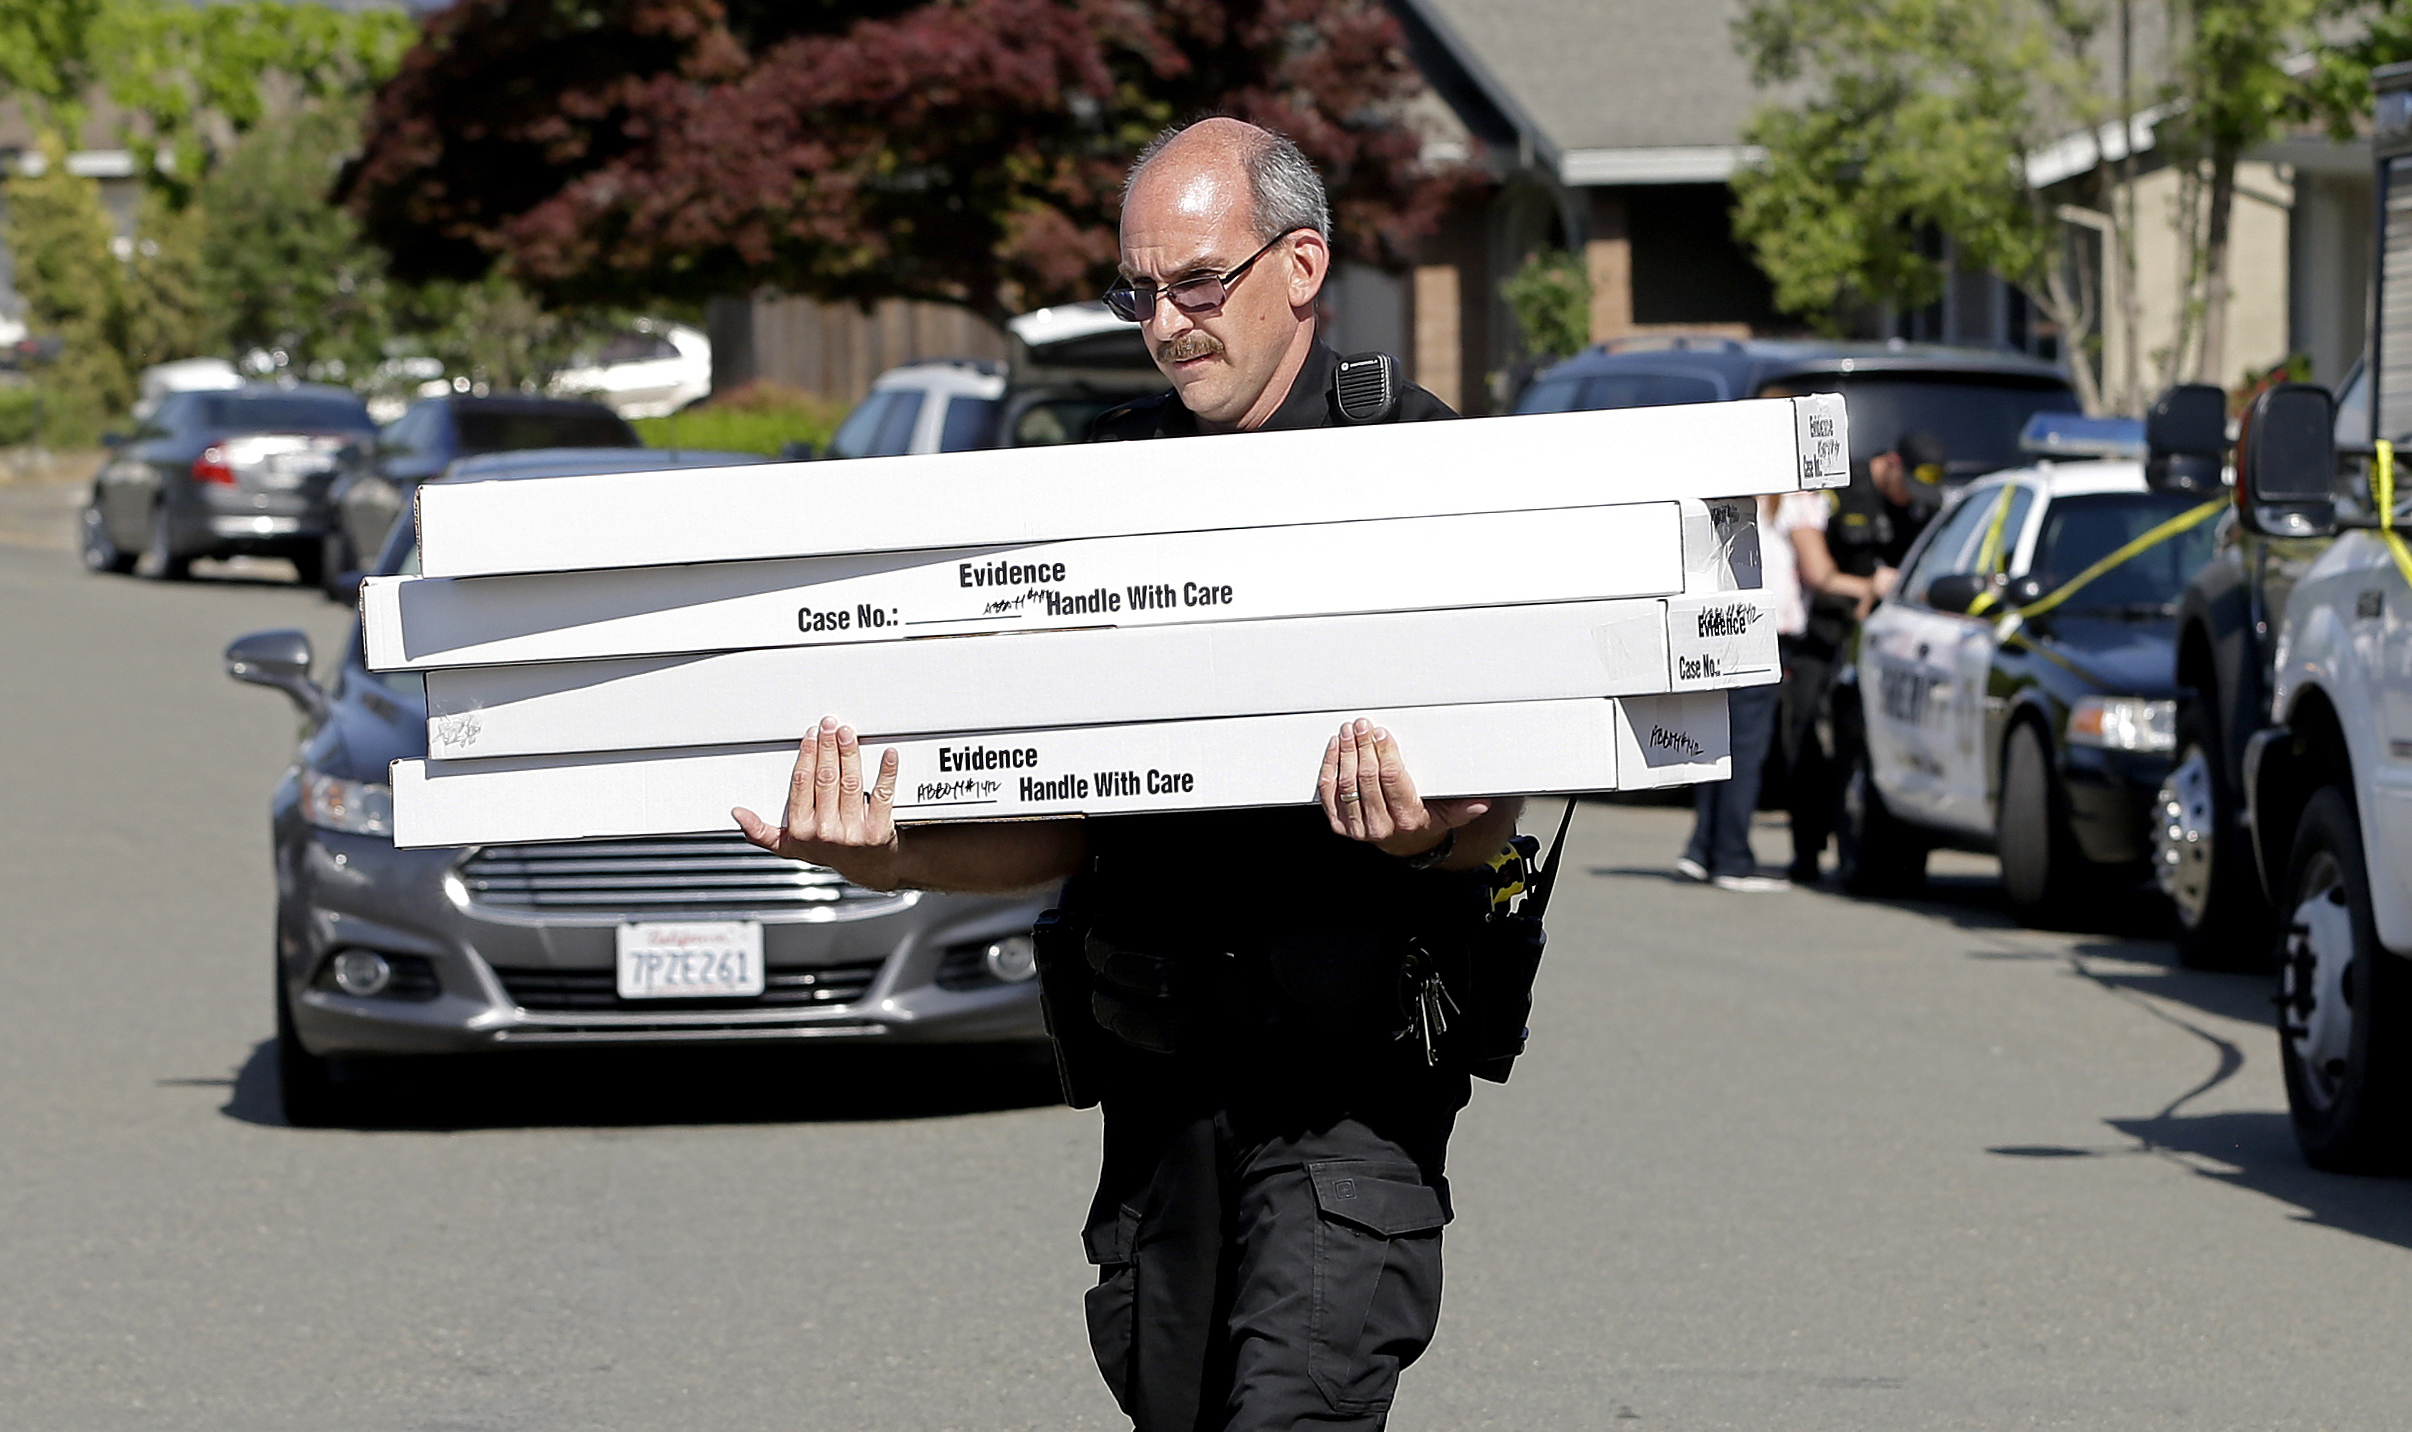 PHOTO: John Lopes, a crime scene investigator for the Sacramento County Sheriff's office, carries boxes of evidence taken from the home of murder suspect Joseph DeAngelo to a sheriff's vehicle, April 26, 2018, in Citrus Heights, Calif.